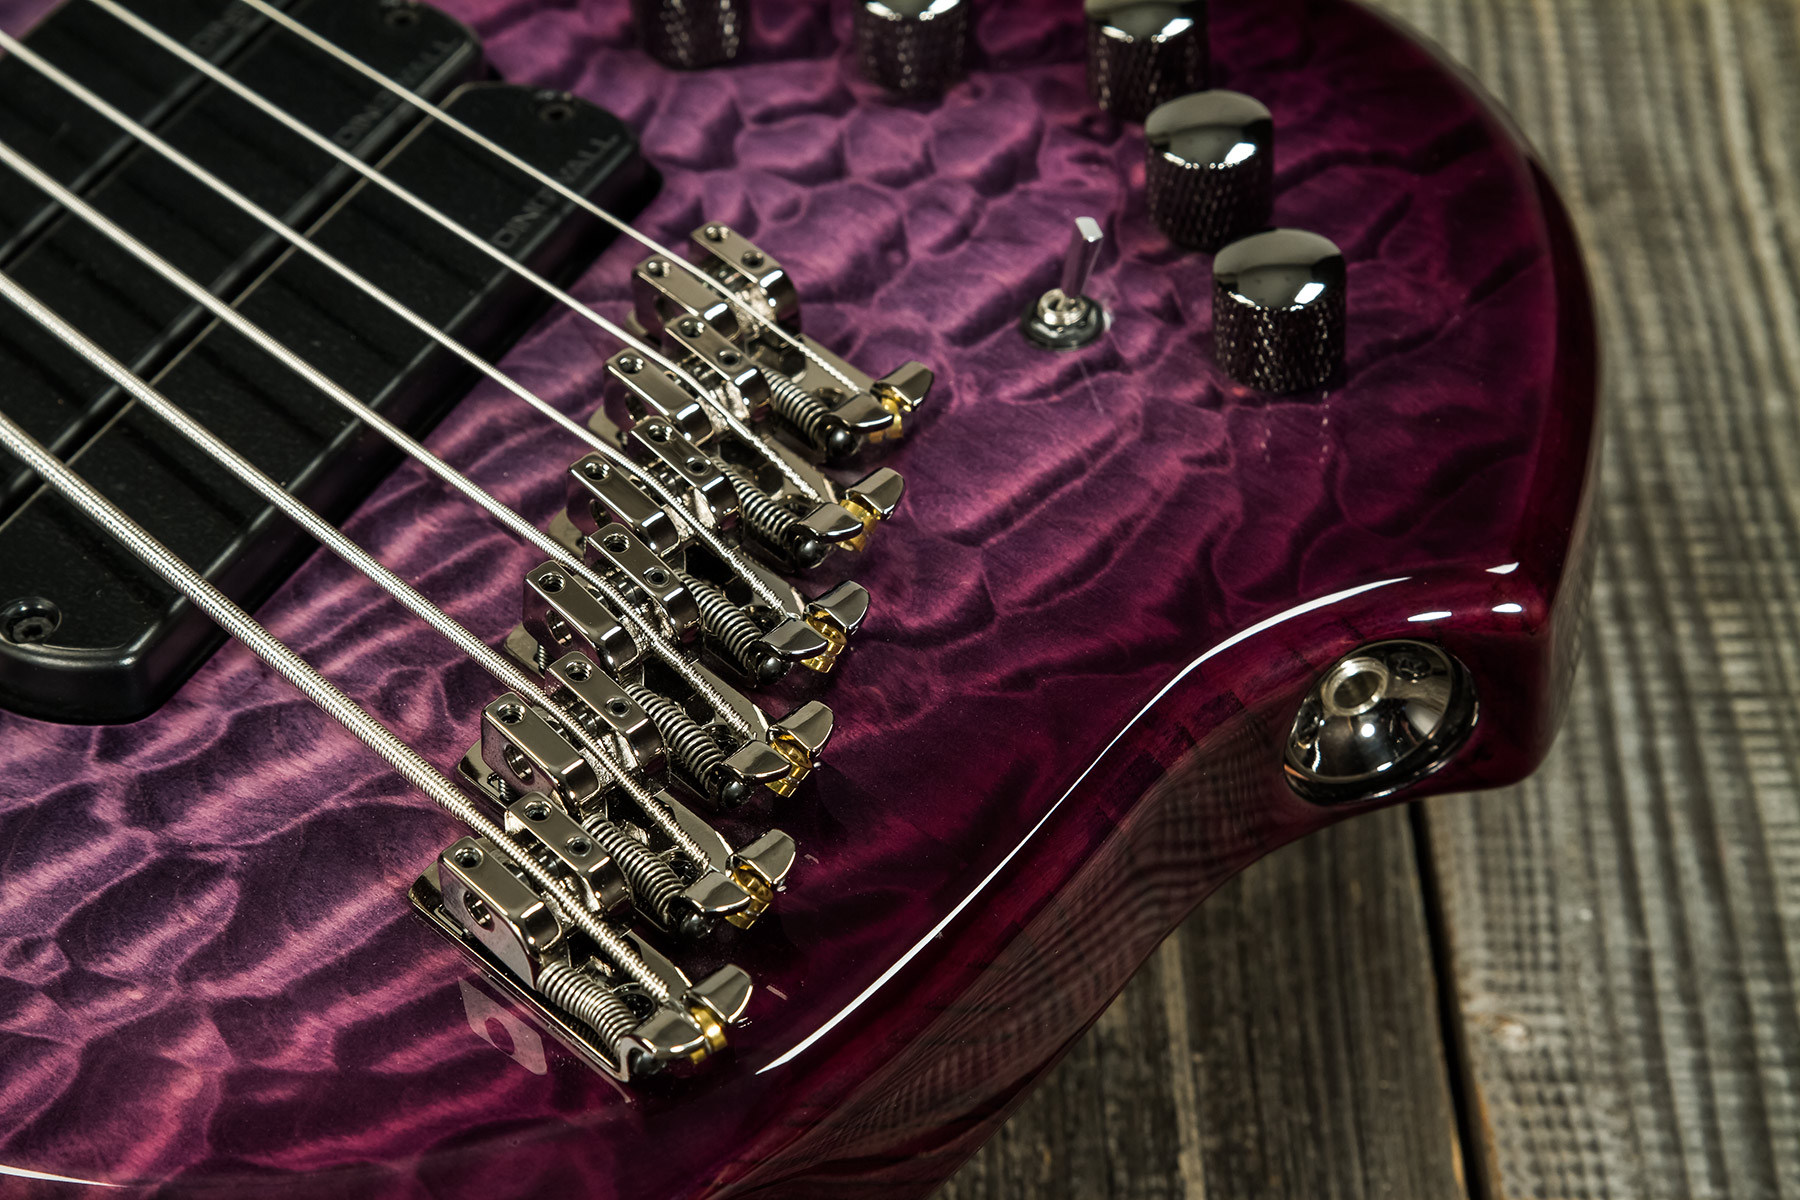 Dingwall Combustion Cb3 6c 3pu Active Mn - Ultraviolet - Solid body electric bass - Variation 3